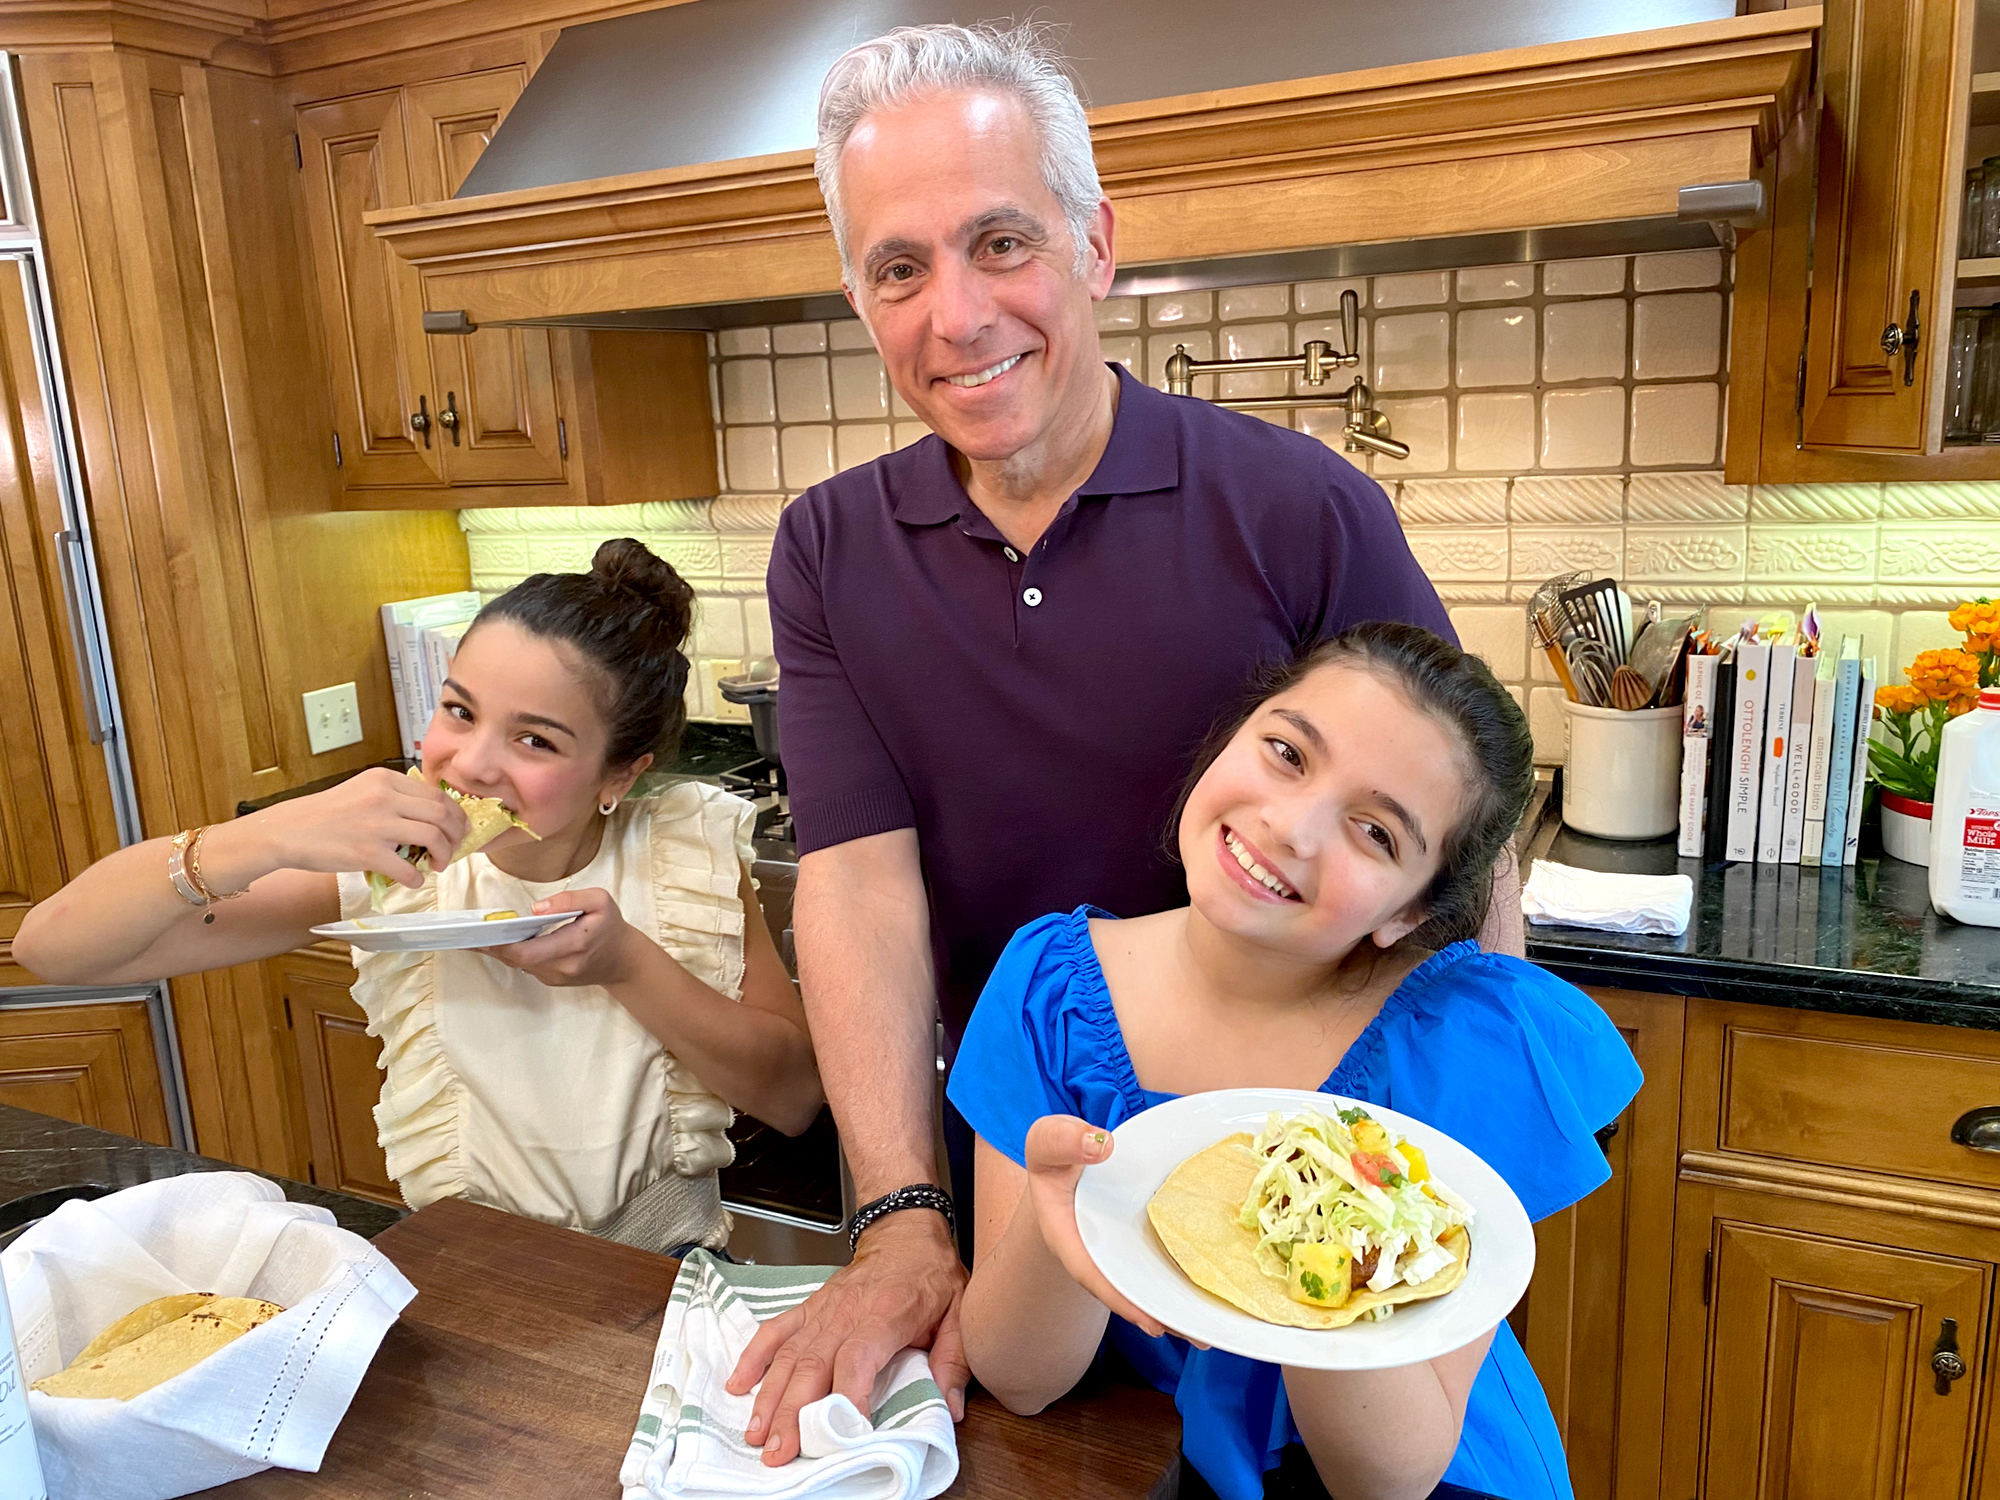 https://www.usmagazine.com/wp-content/uploads/2020/06/Chef-Geoffrey-Zakarian-Makes-Easy-Chicken-Tacos-for-Father%E2%80%99s-Day-2.jpg?quality=40&strip=all